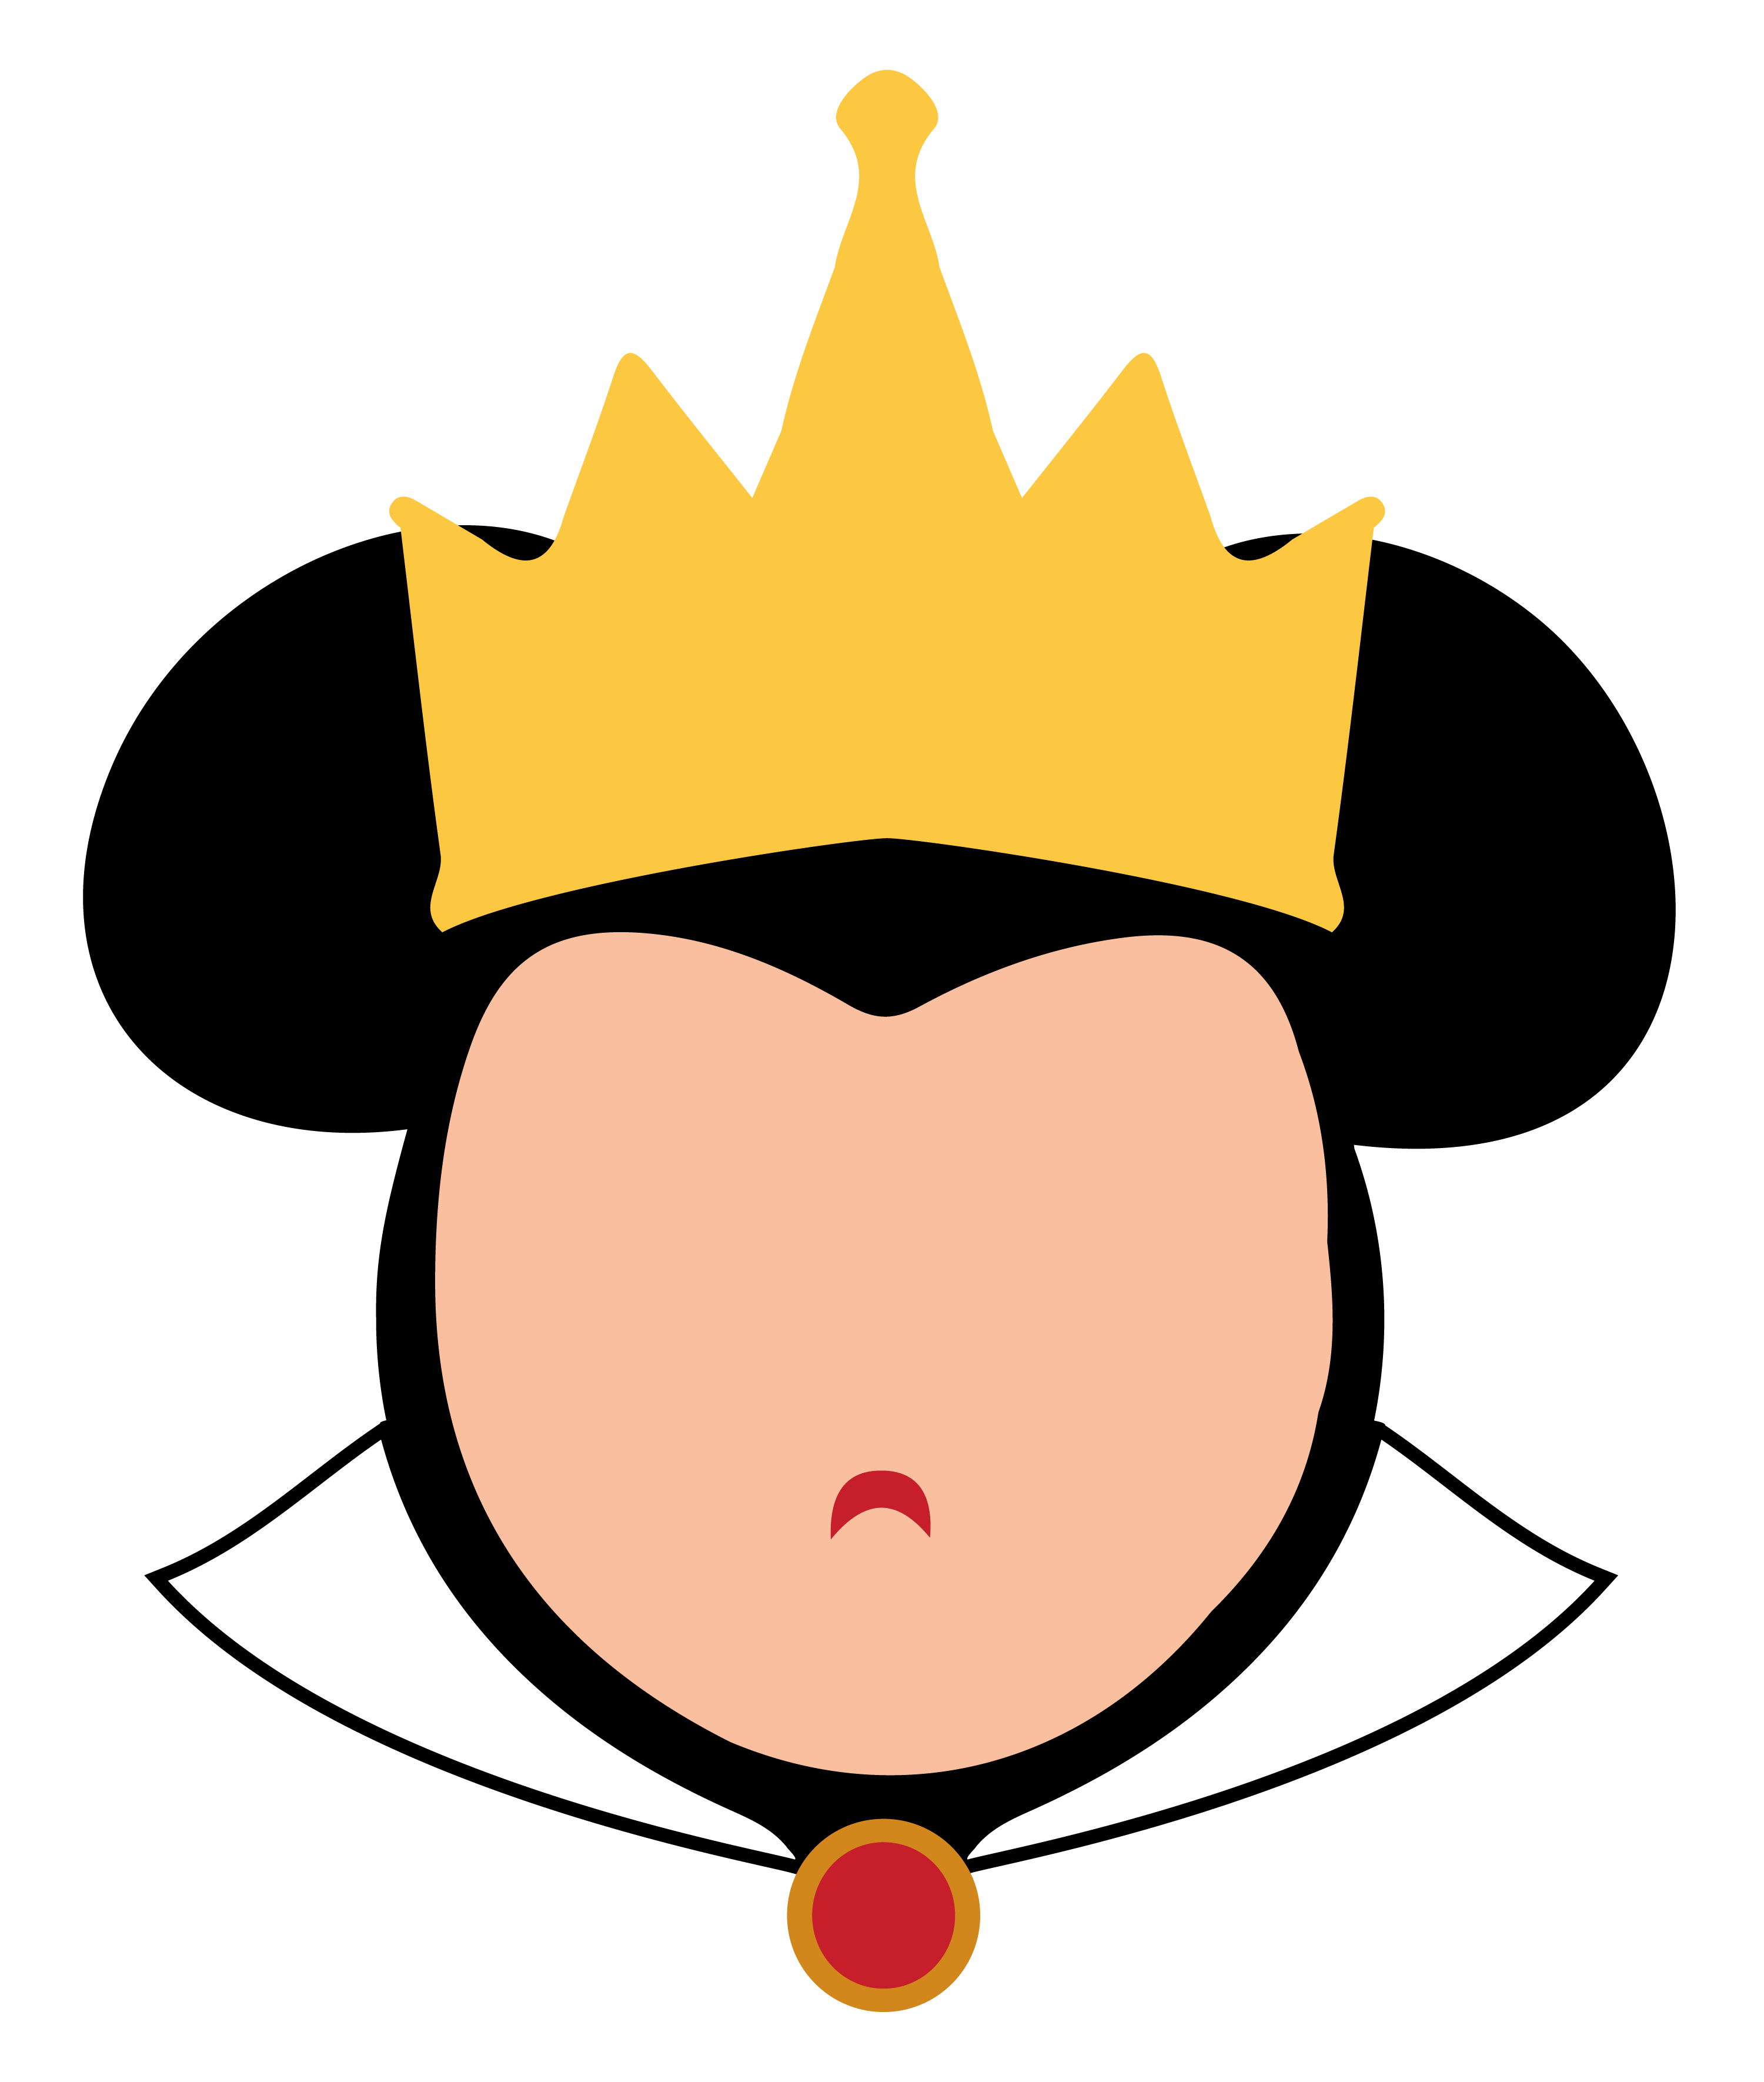 Download Clipart crown snow white, Clipart crown snow white ...